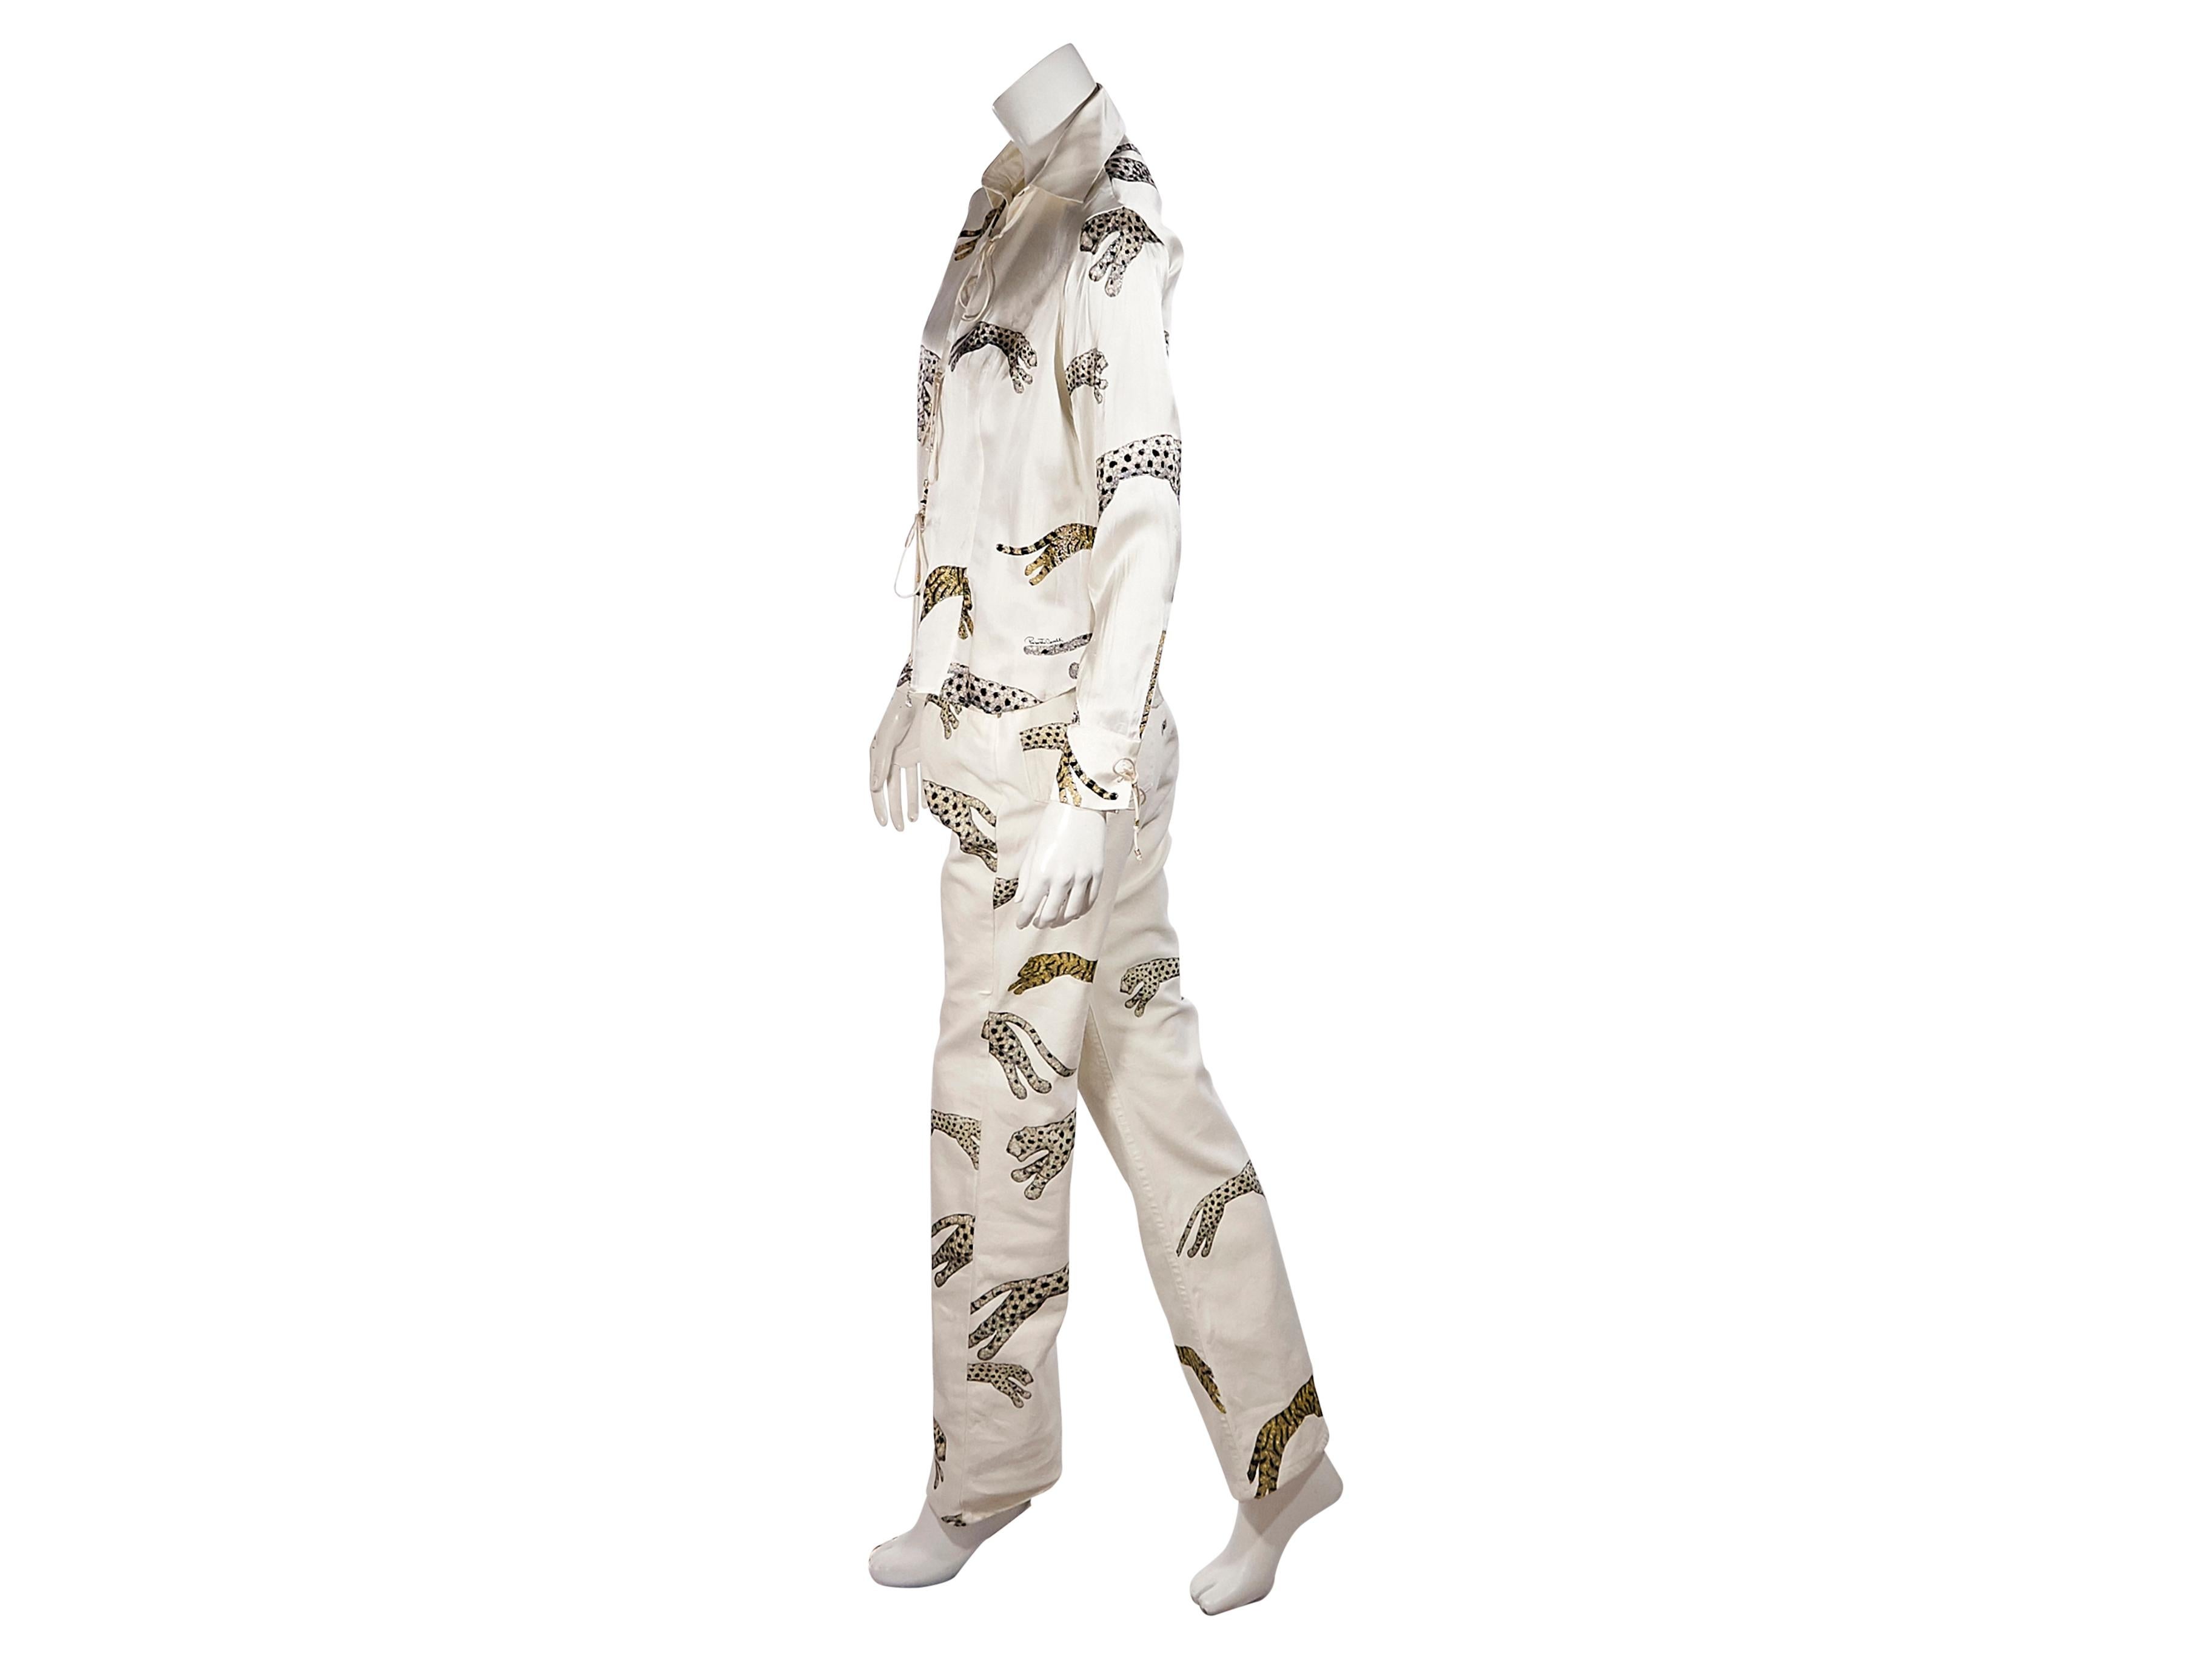 Product details:  Vintage cream embellished tiger silk blouse and jeans set by Roberto Cavalli.  Circa the 1990s.  Spread collar.  Long sleeves.  Tie-front closures.  Matching jeans.  Banded waist with belt loops.  Button and zip fly closure. 